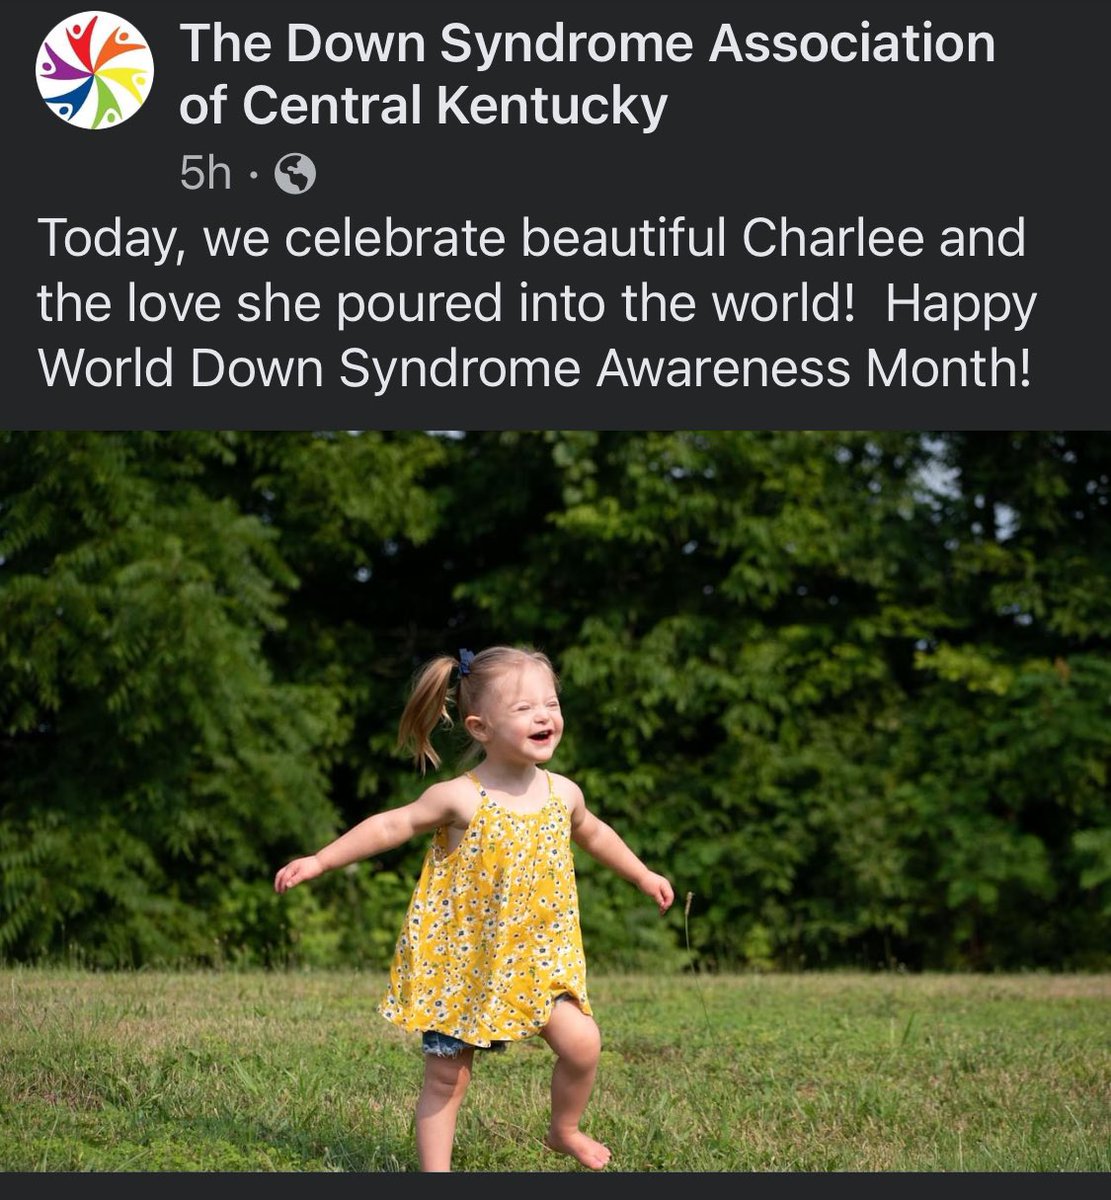 Thank you @DSAofCentralKY for continuing to honor our sweet girl.

#CharleesAngels 
#CharleesOrchard 
#DownSyndrome 
#DownSyndromeAwareness 
#TheLuckyFew